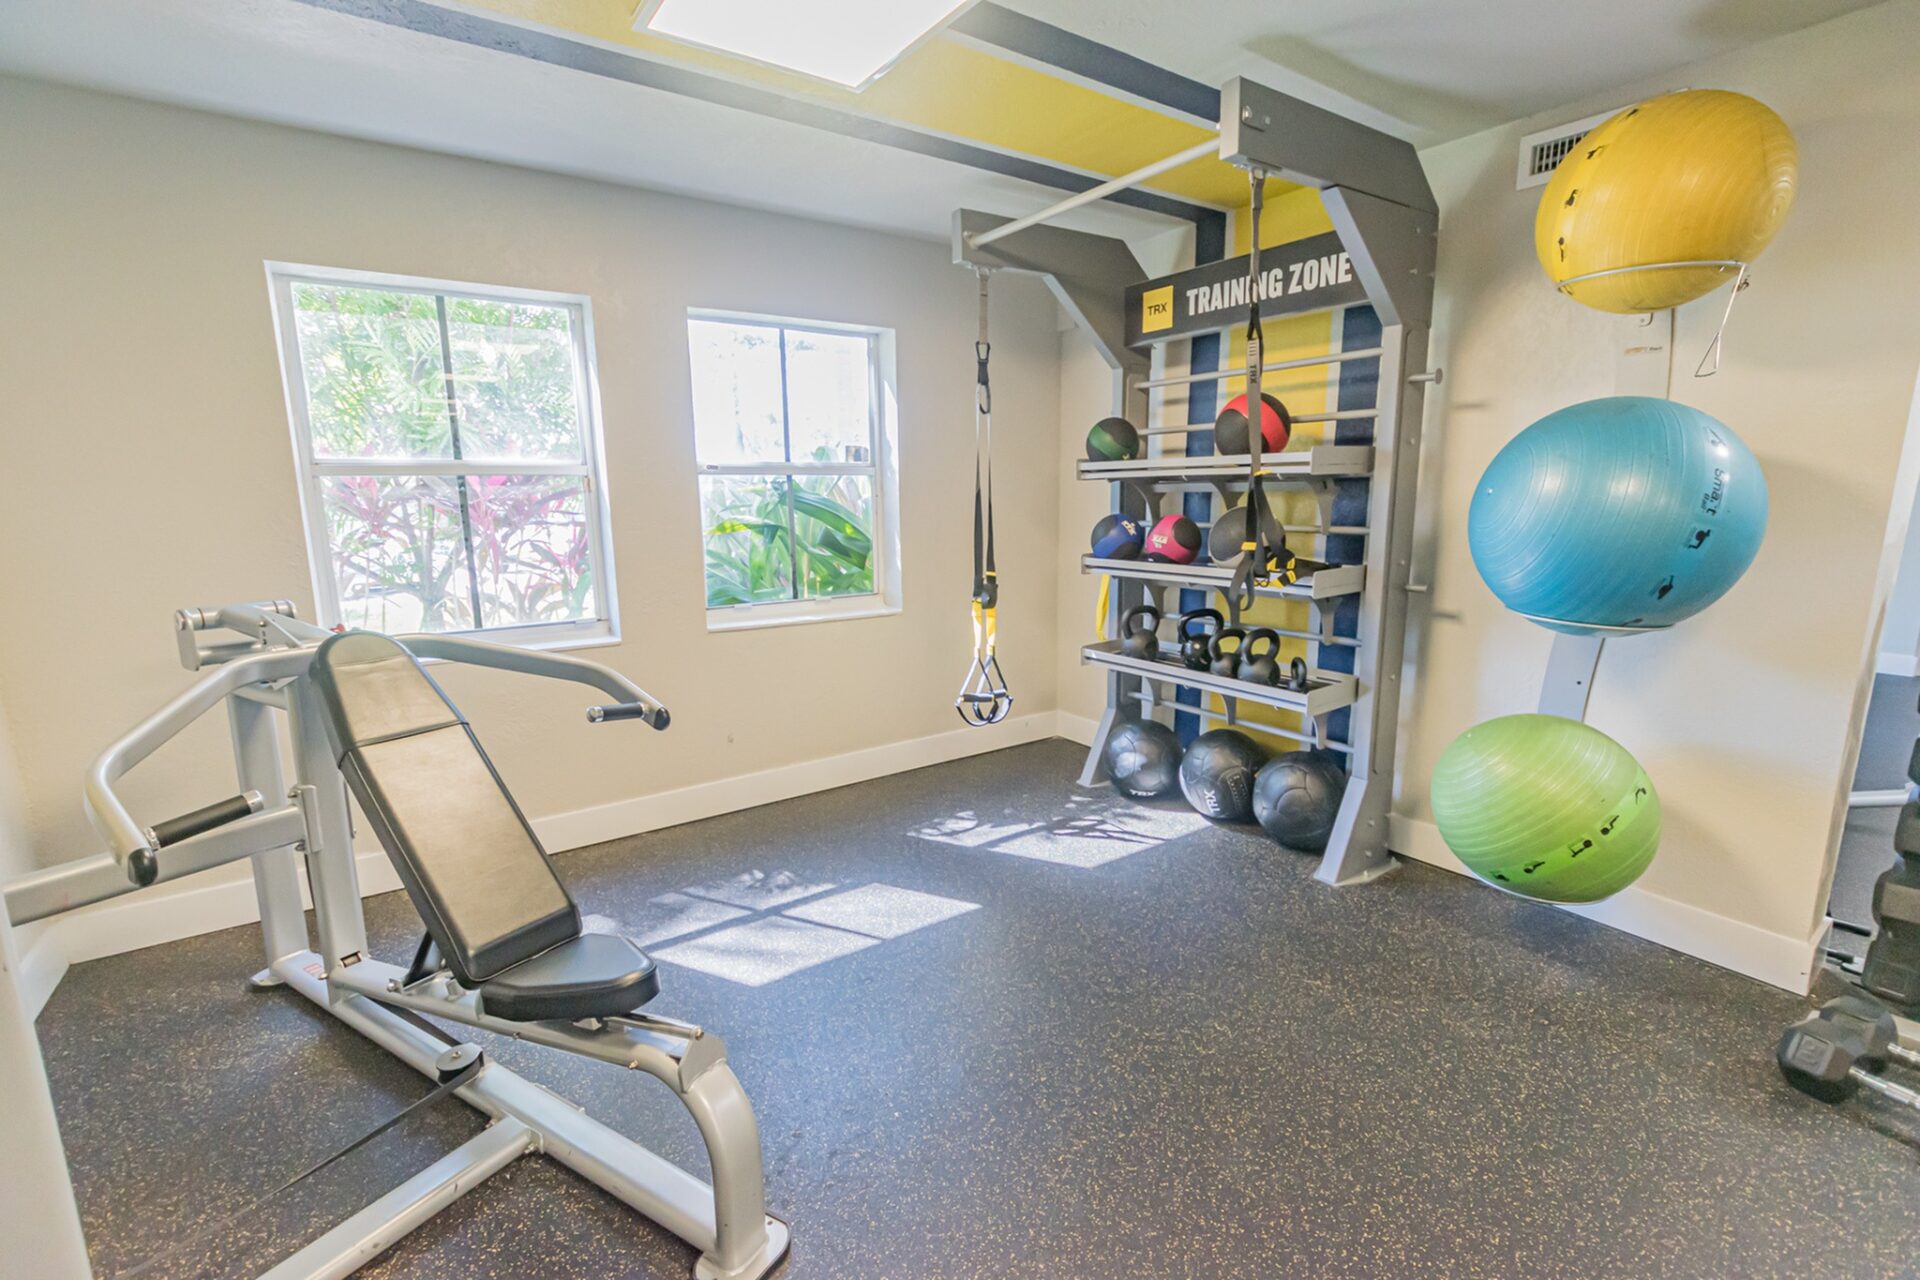 Indoor gym with a variety of workout equipment and 2 windows.